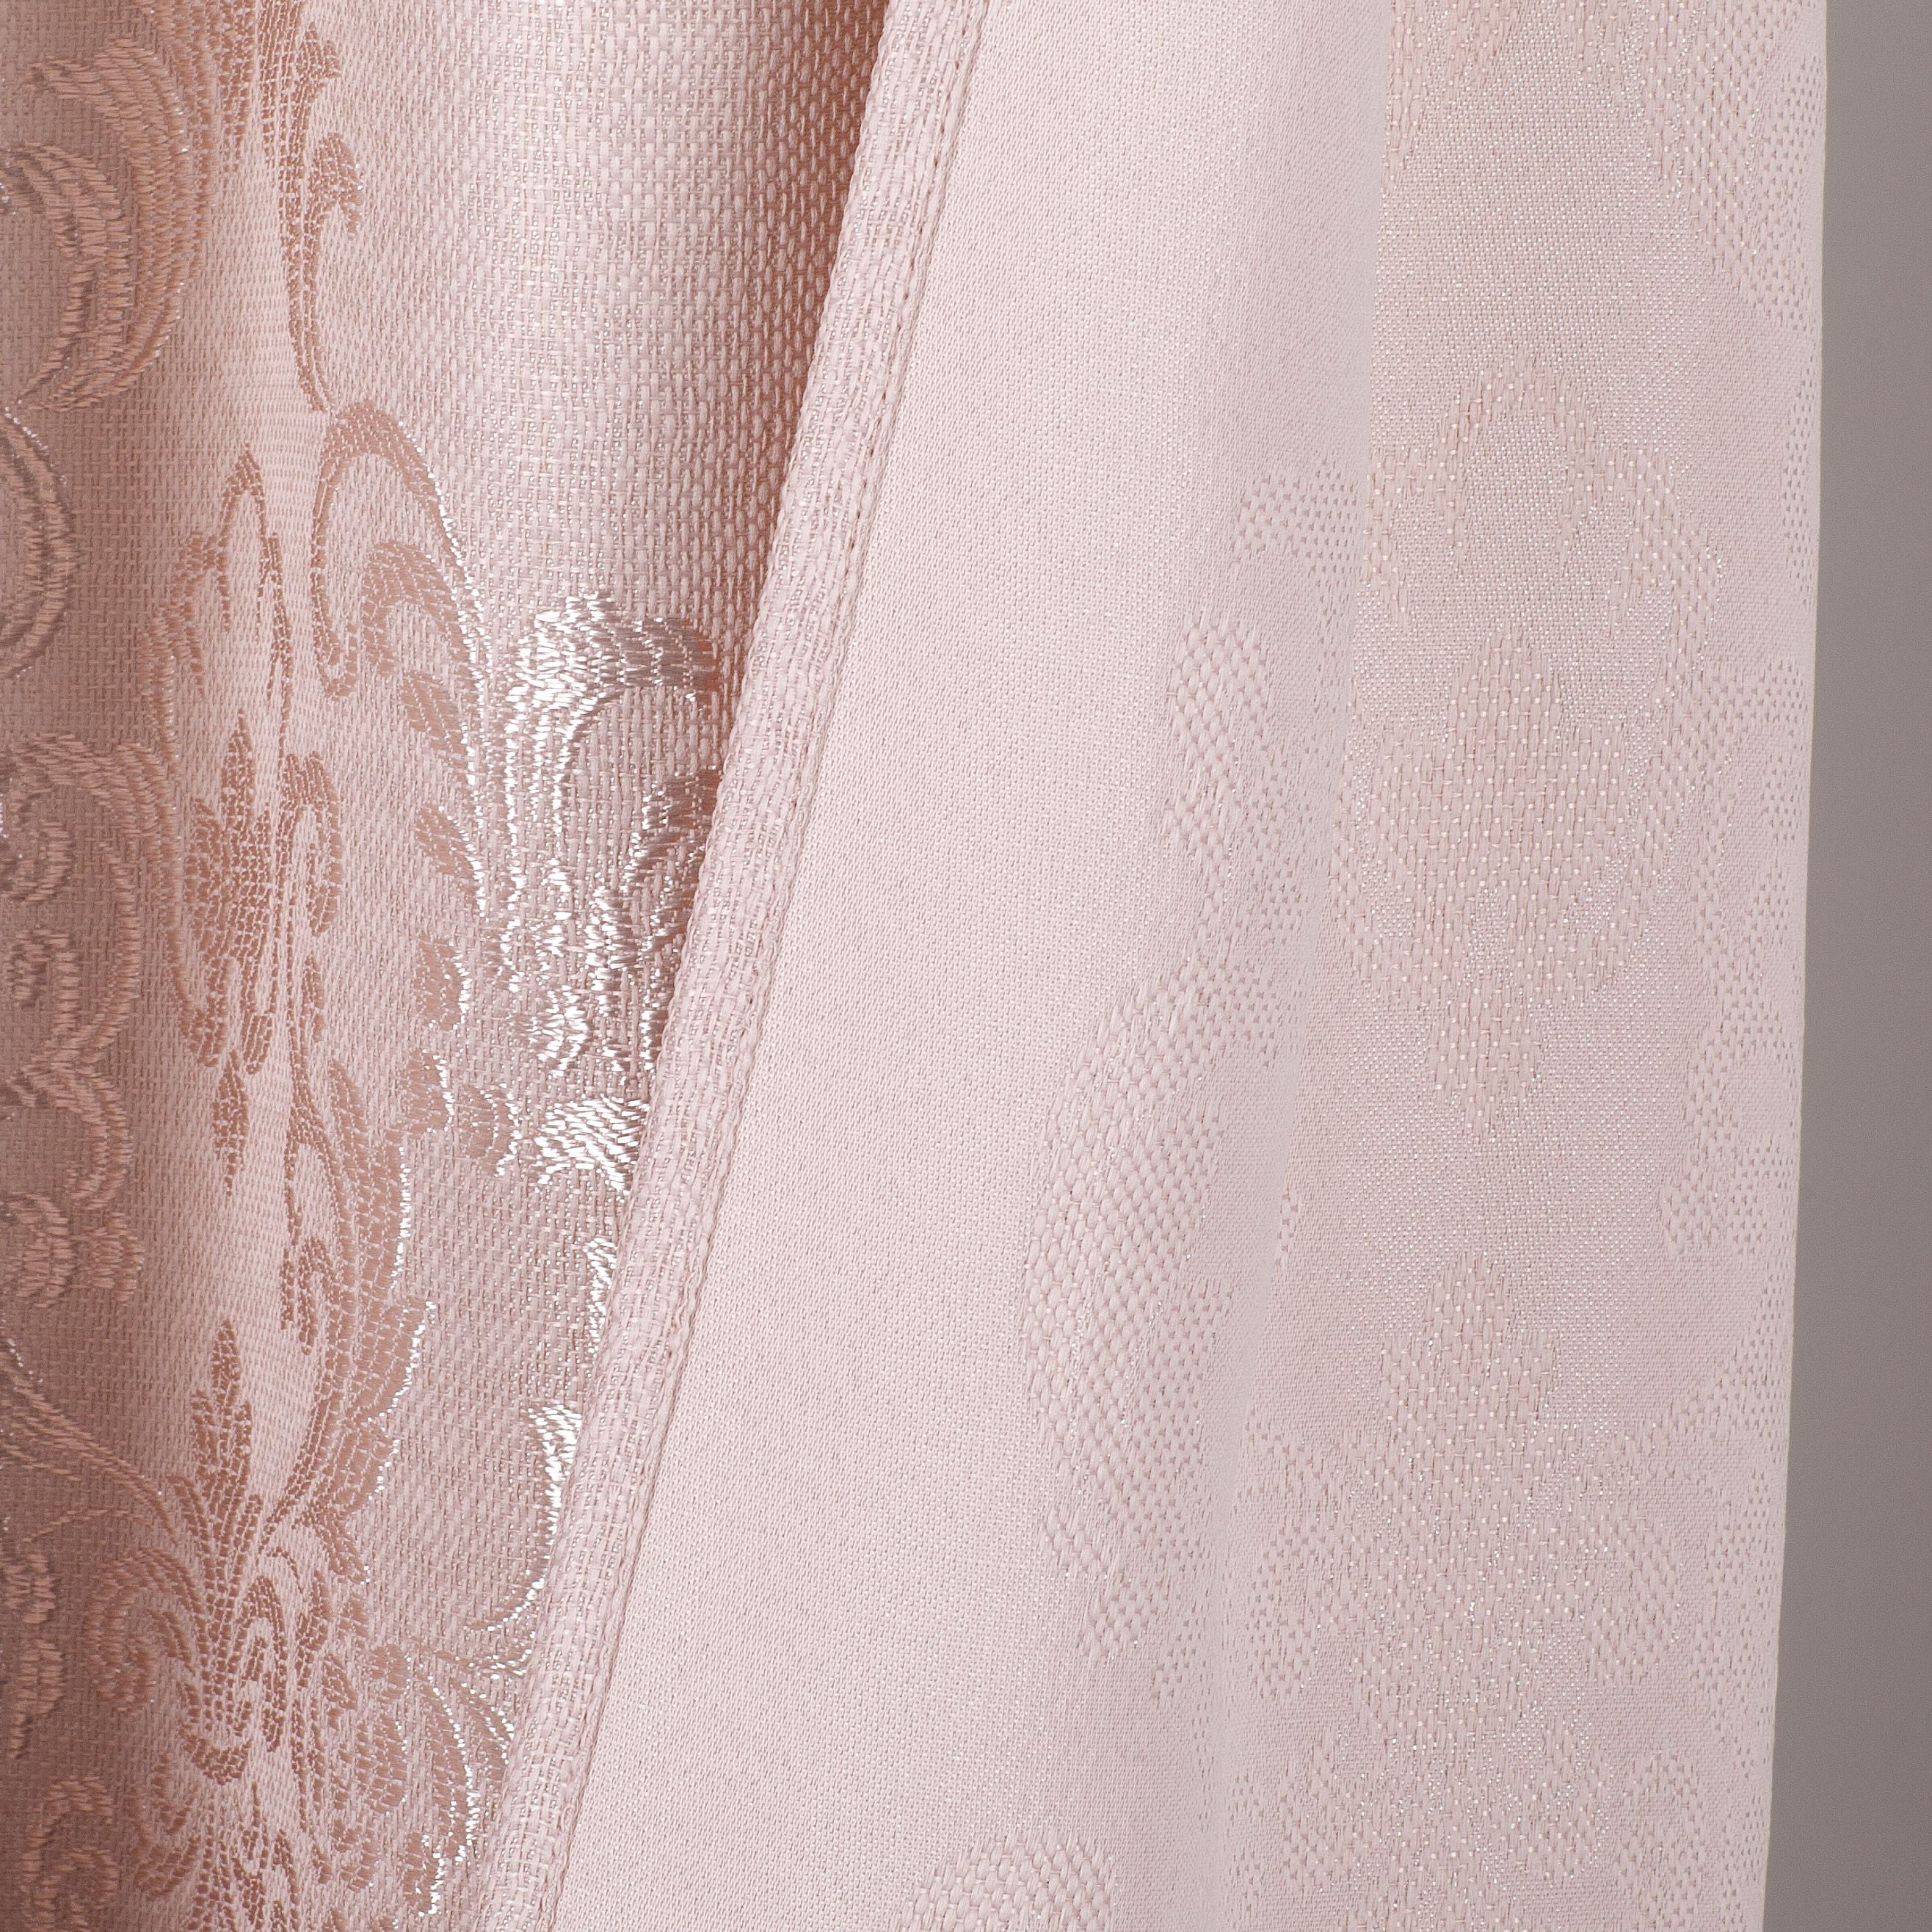 Dainty Home Majestic Satin Embroidered Damask Textured Weaved Cotton Feel Designed Fabric Shower Curtain